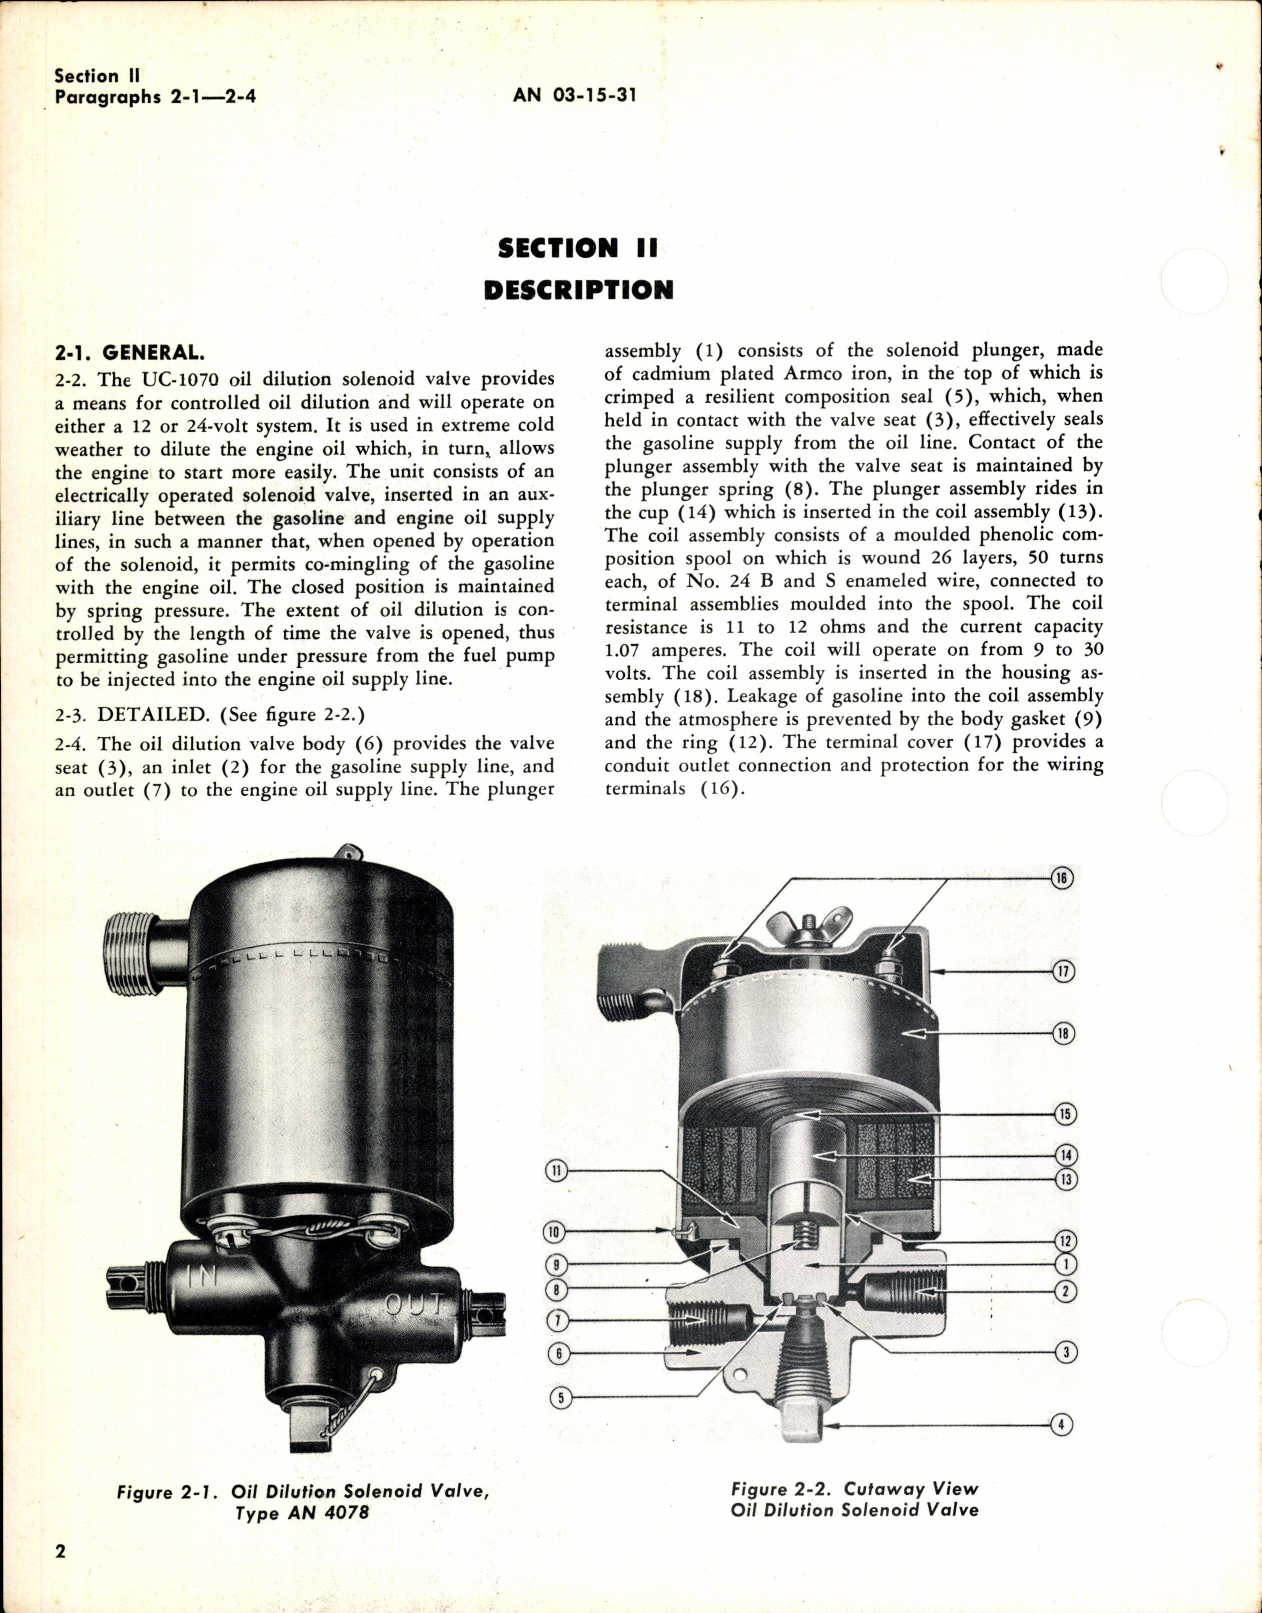 Sample page 4 from AirCorps Library document: Instructions for Oil Dilution Solenoid Valve Type AN 4078 